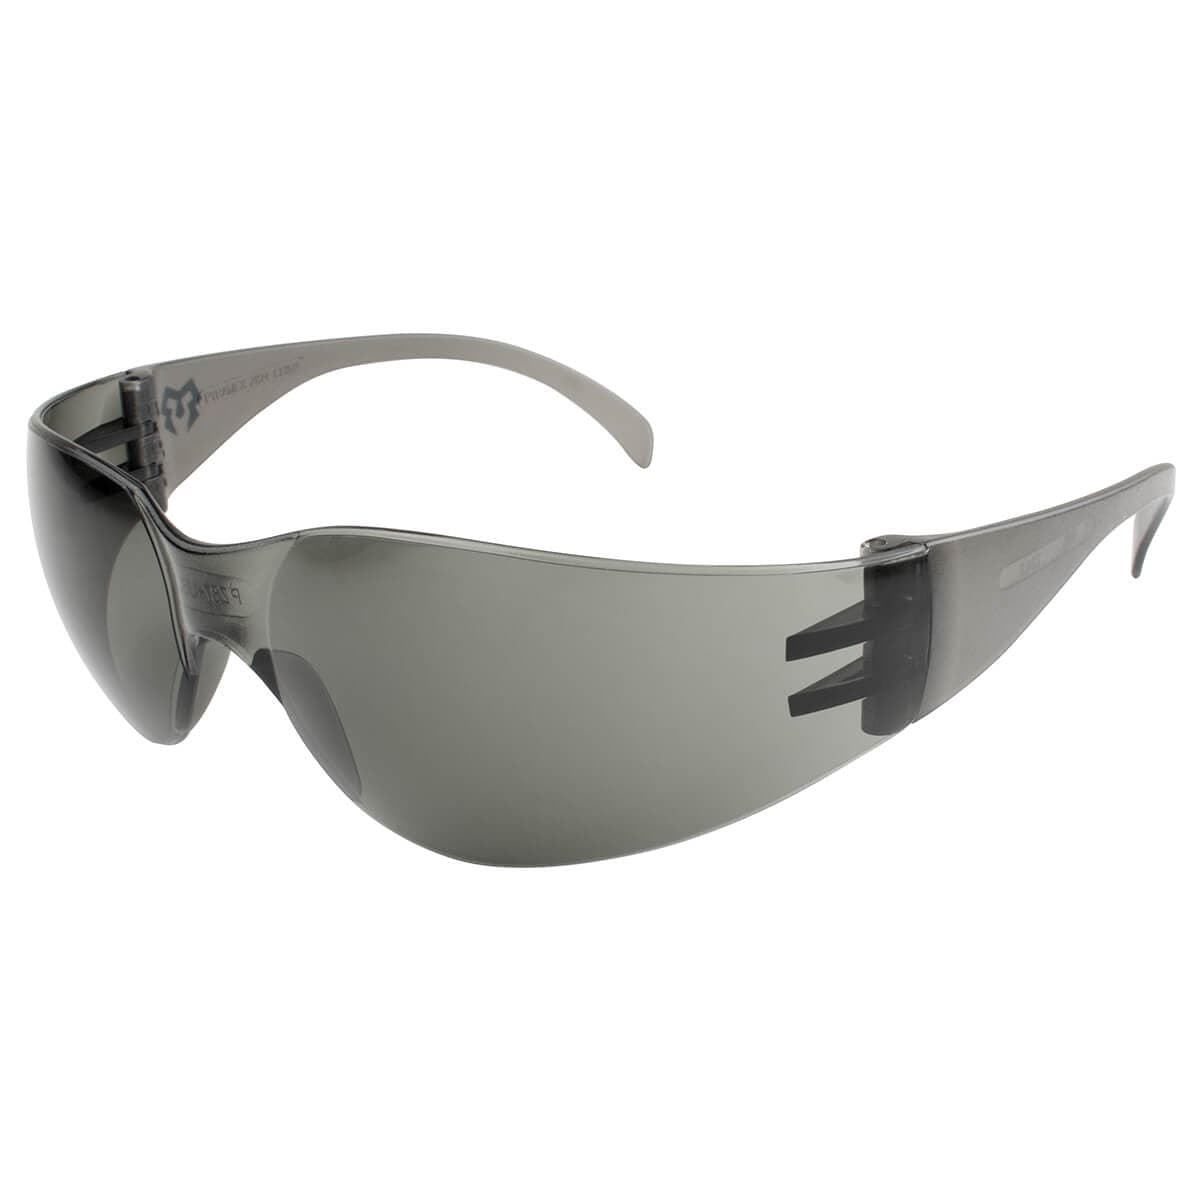 METEL M10 Safety Glasses with Gray Lenses